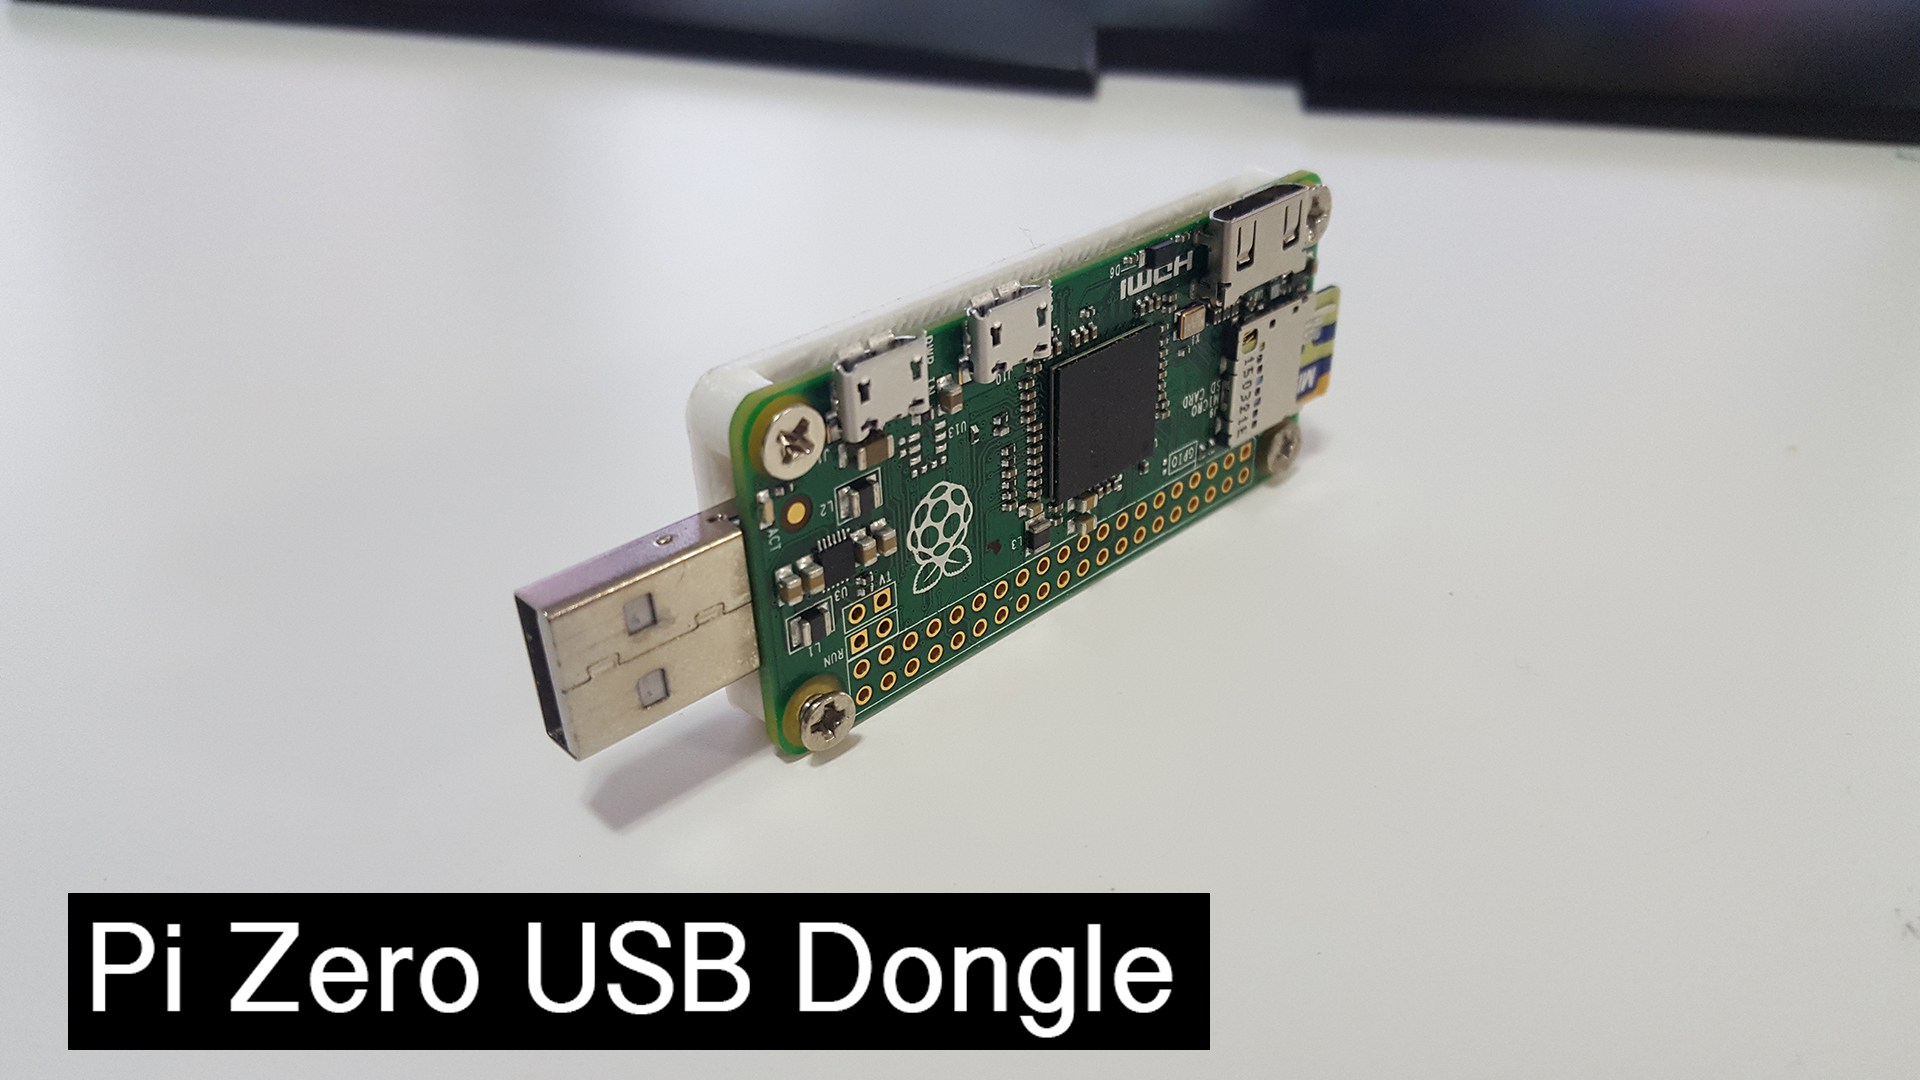 Turn your Zero Pi into a USB Dongle